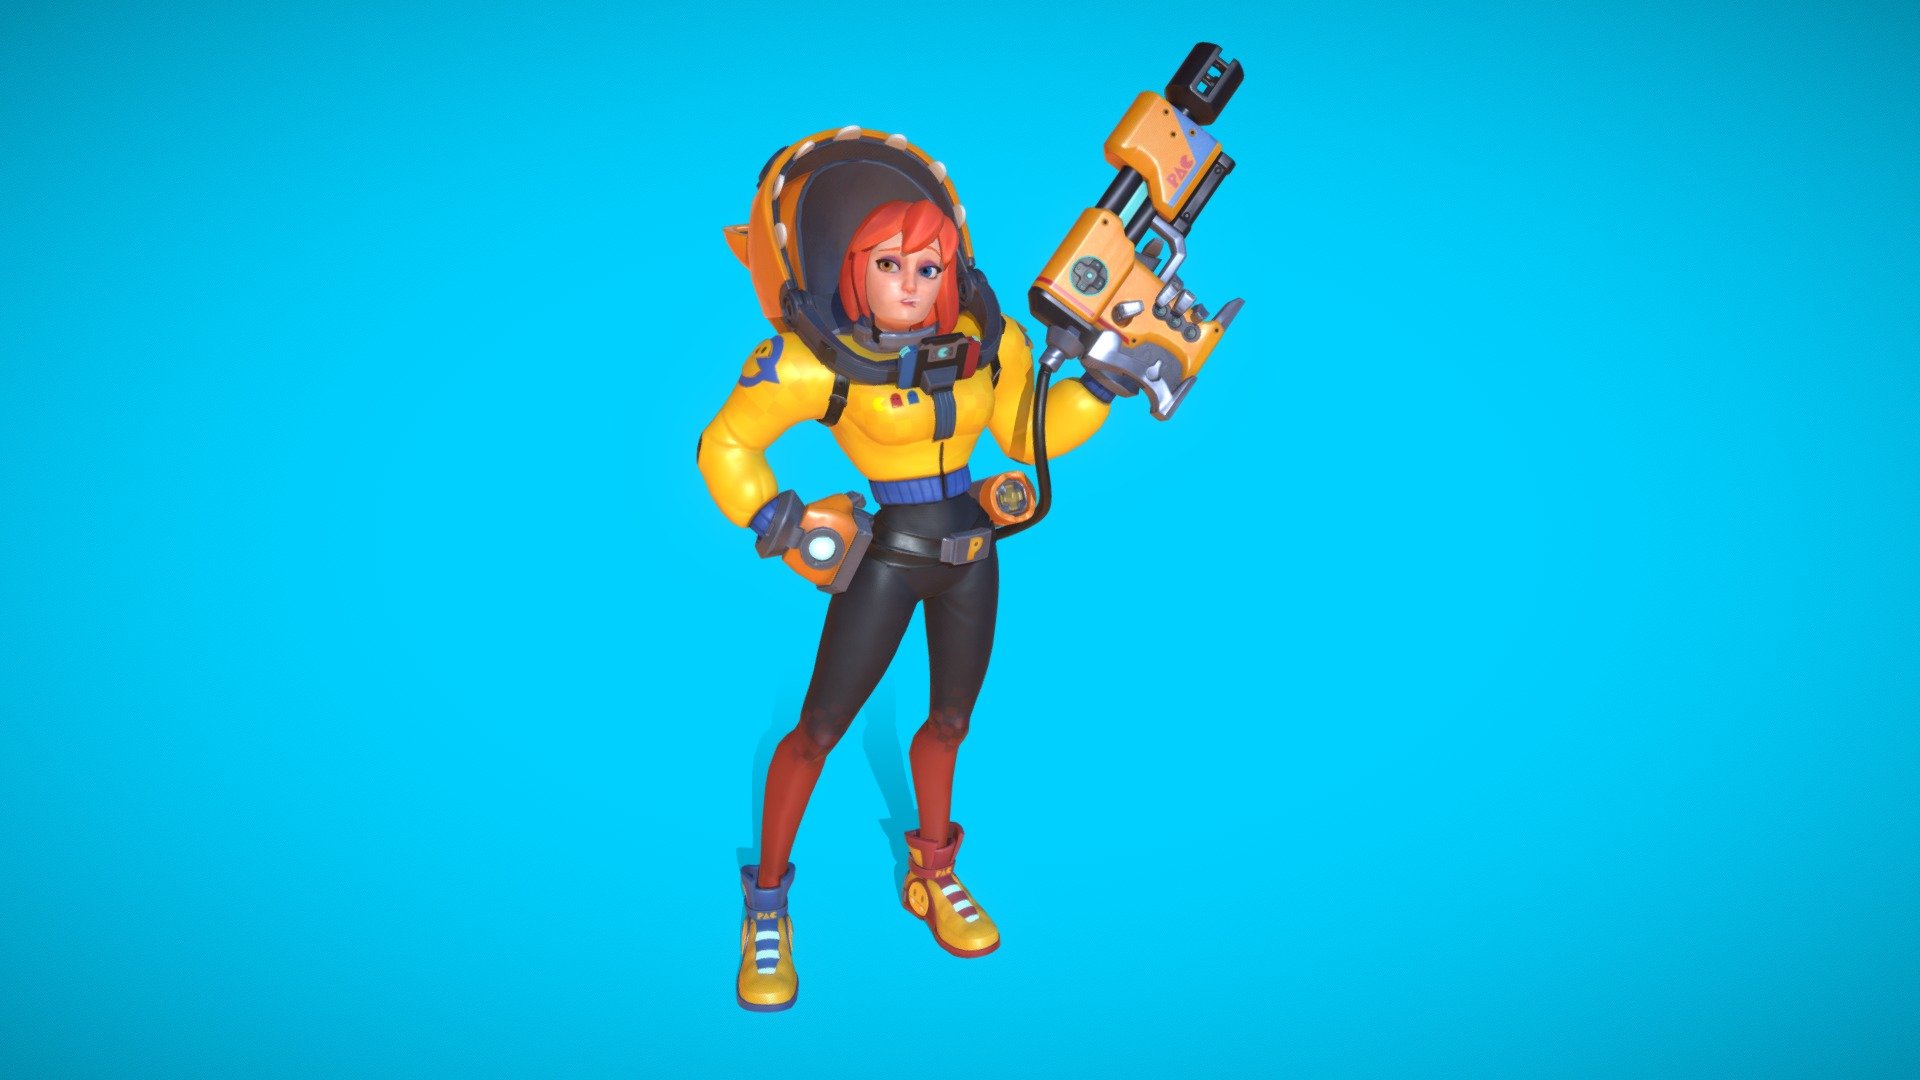 This is Matilda, a stylized character I made for the &ldquo;Stylized Character Challenge Course